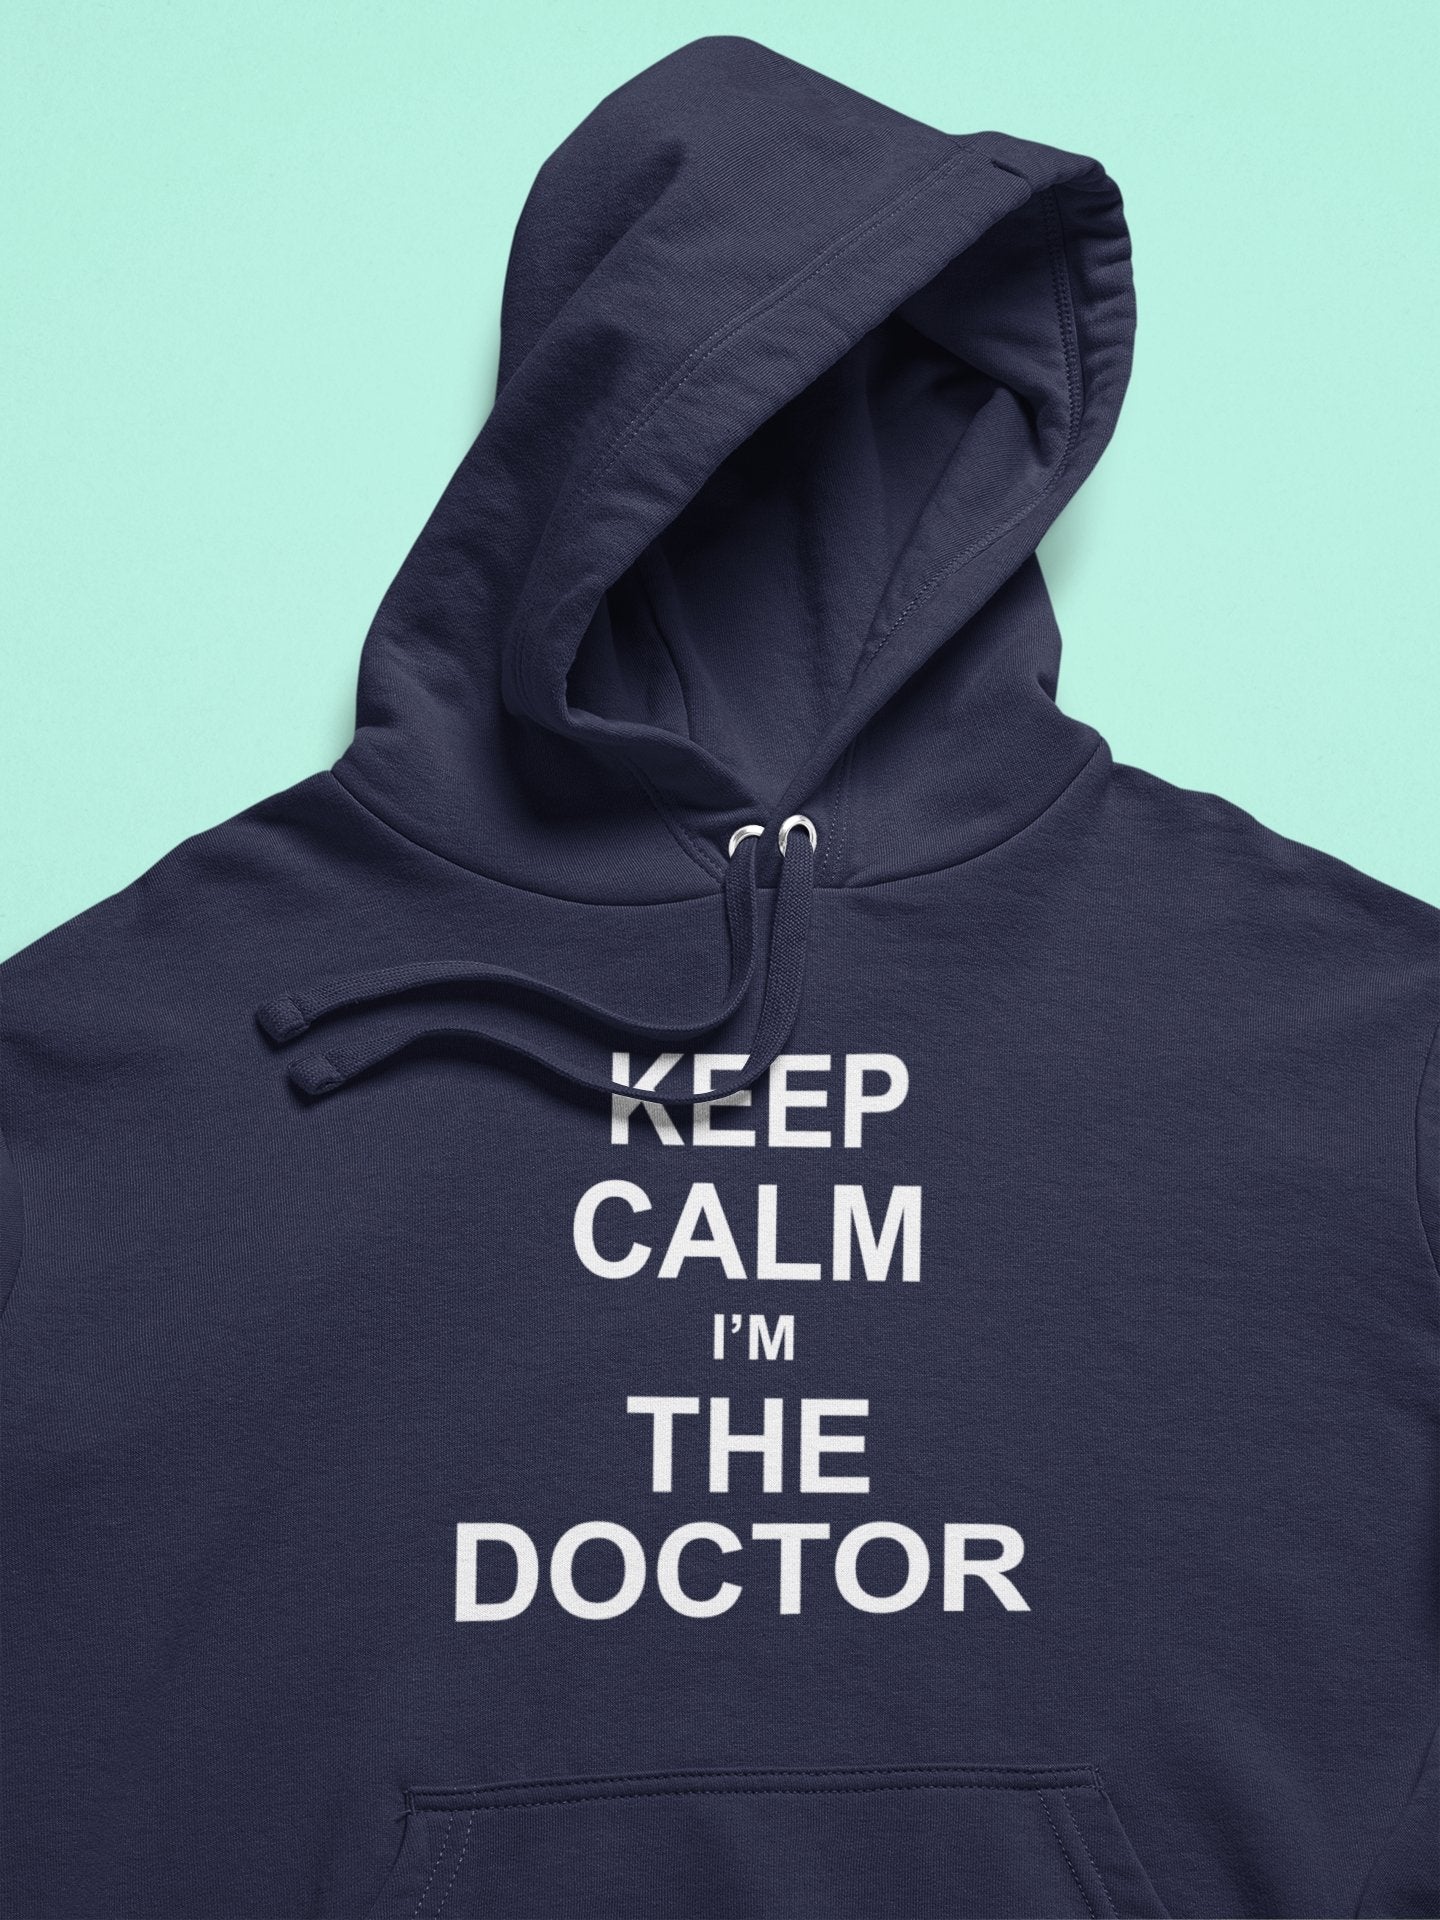 Keep Calm I Am A Doctor Hoodies for Women-FunkyTradition - Funky Tees Club